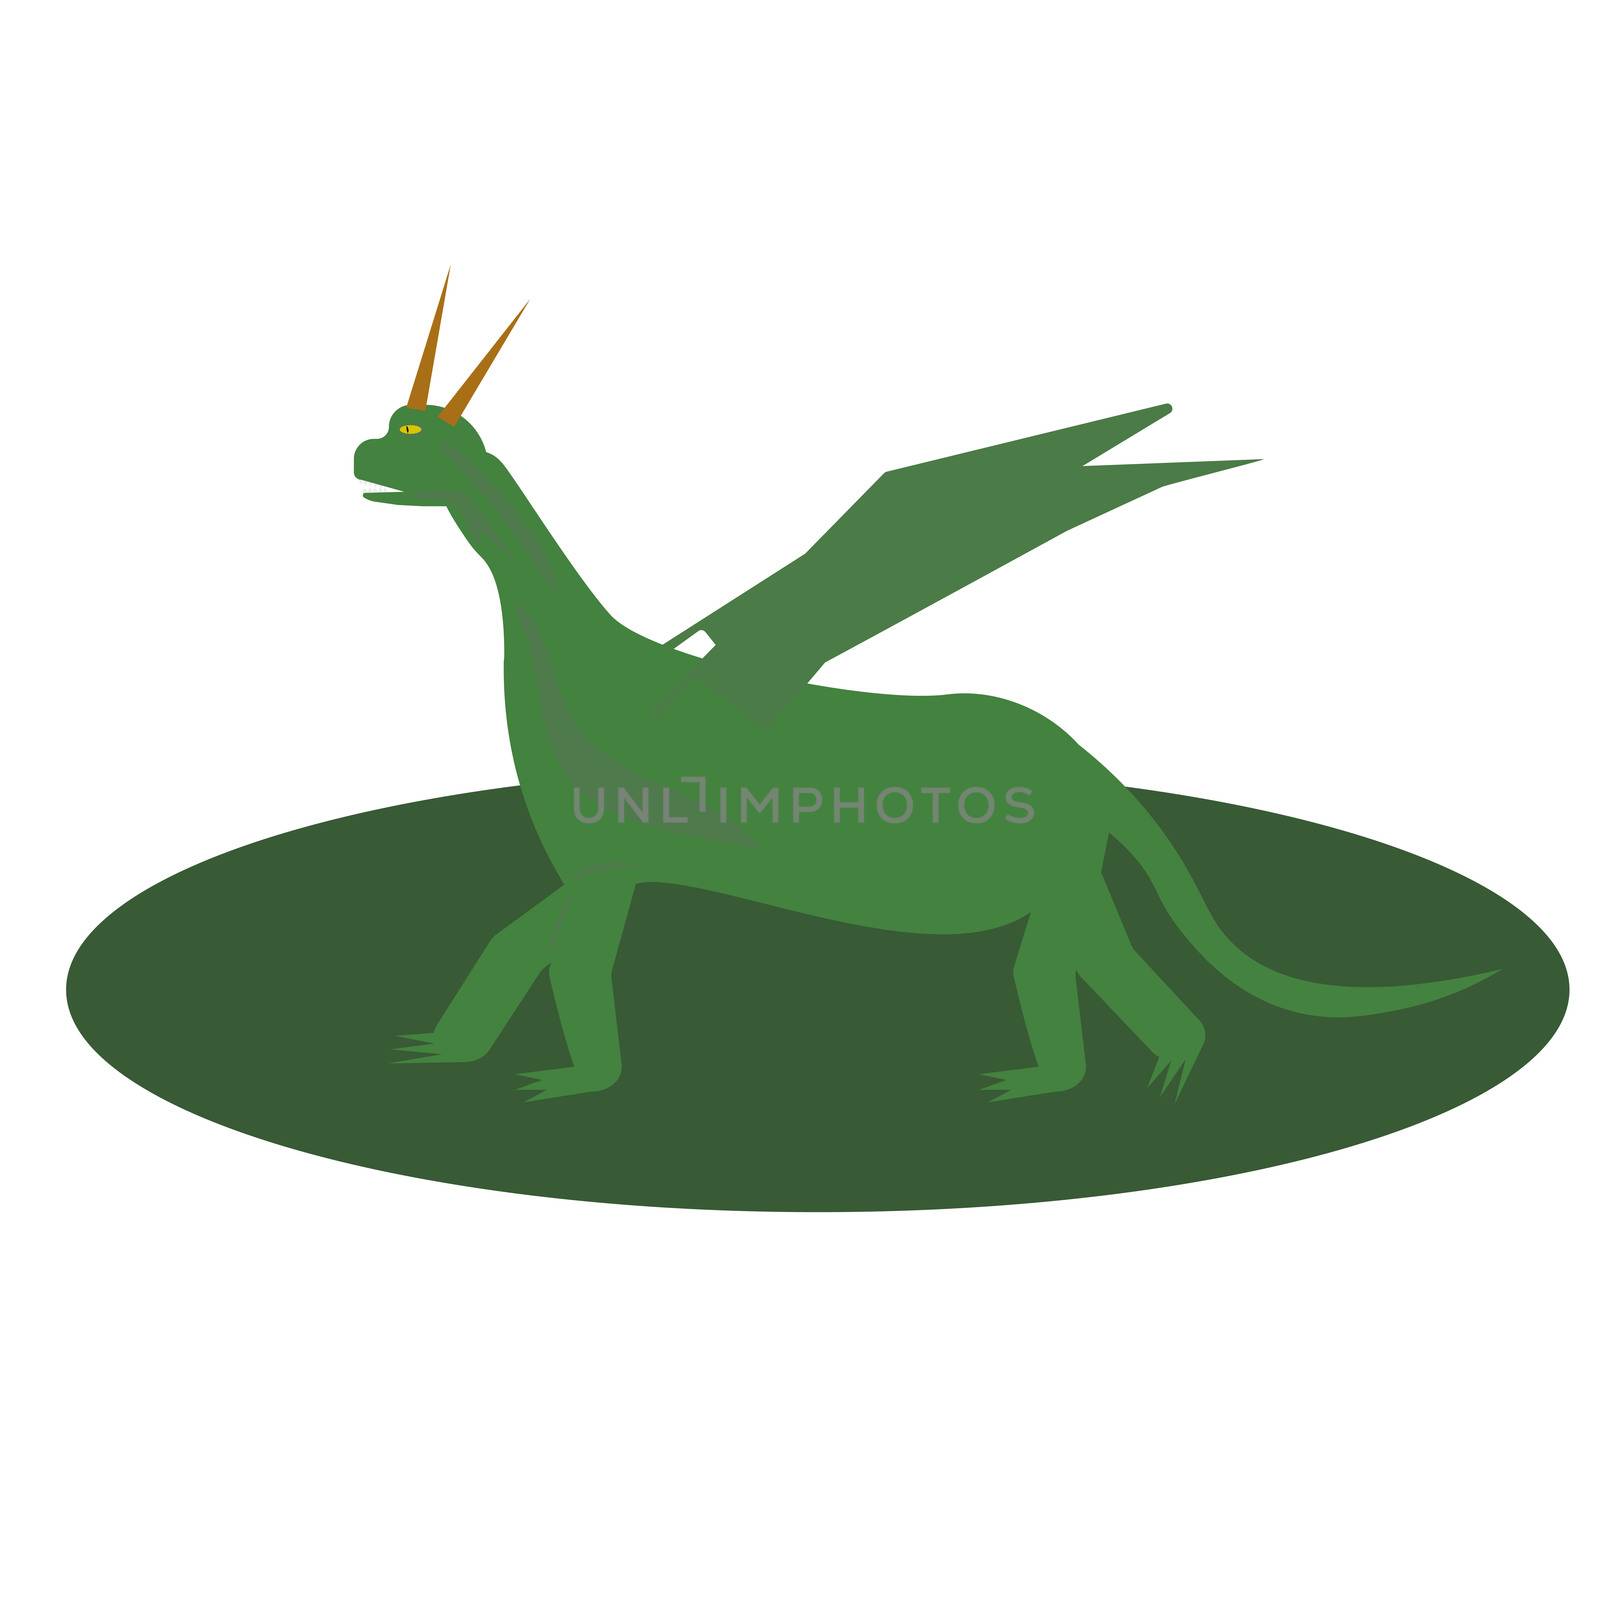 Fairytale green Dragon Flat Isolated Childish Style Simple Drawing In Bright Colors On White Background.